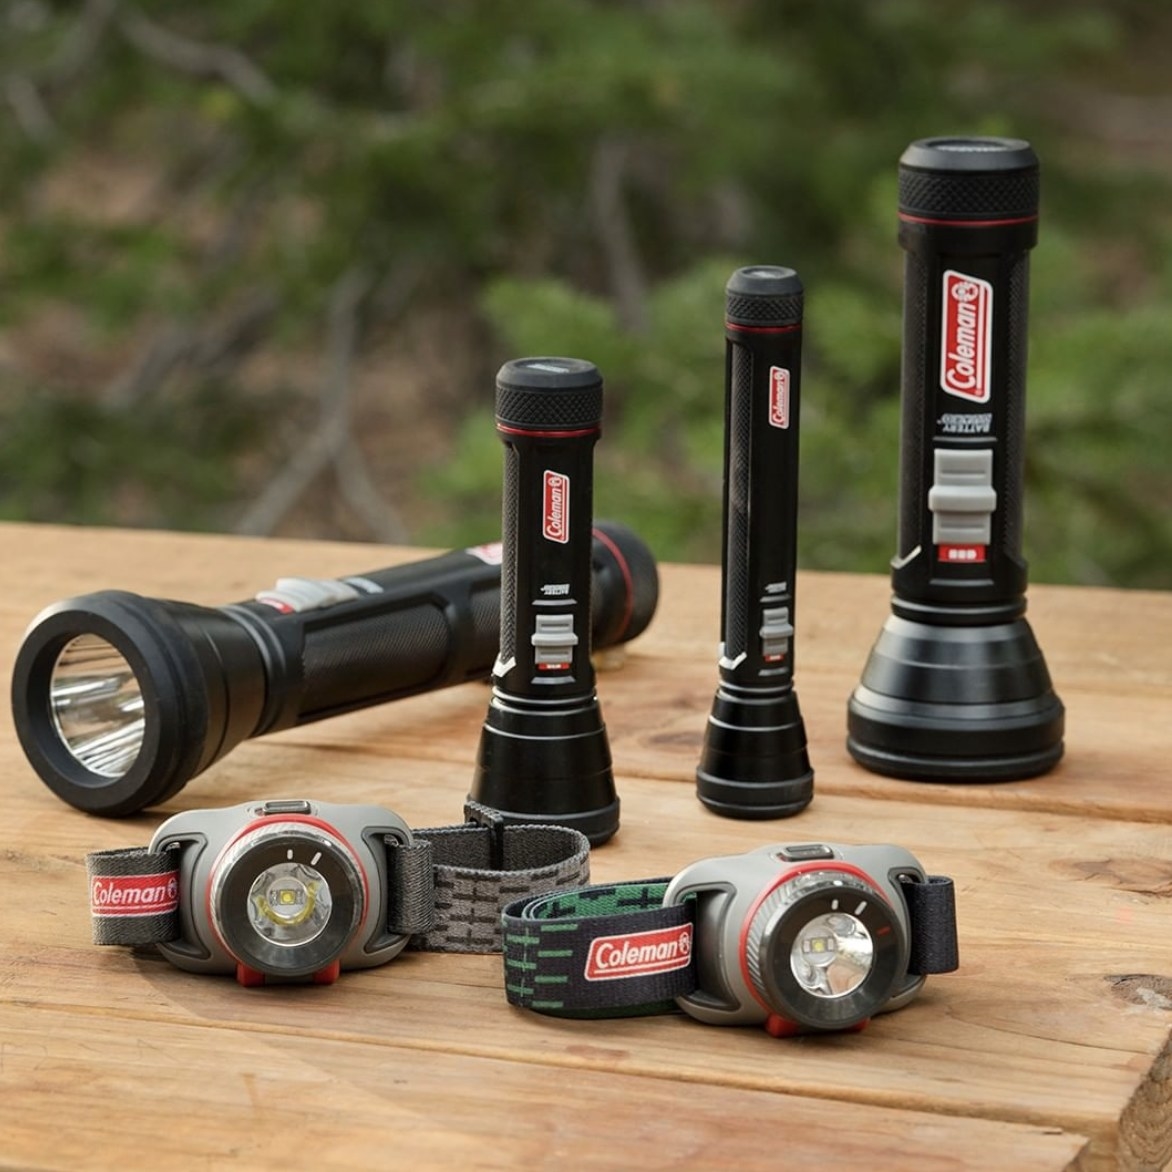 A bunch of flashlights and headlamps